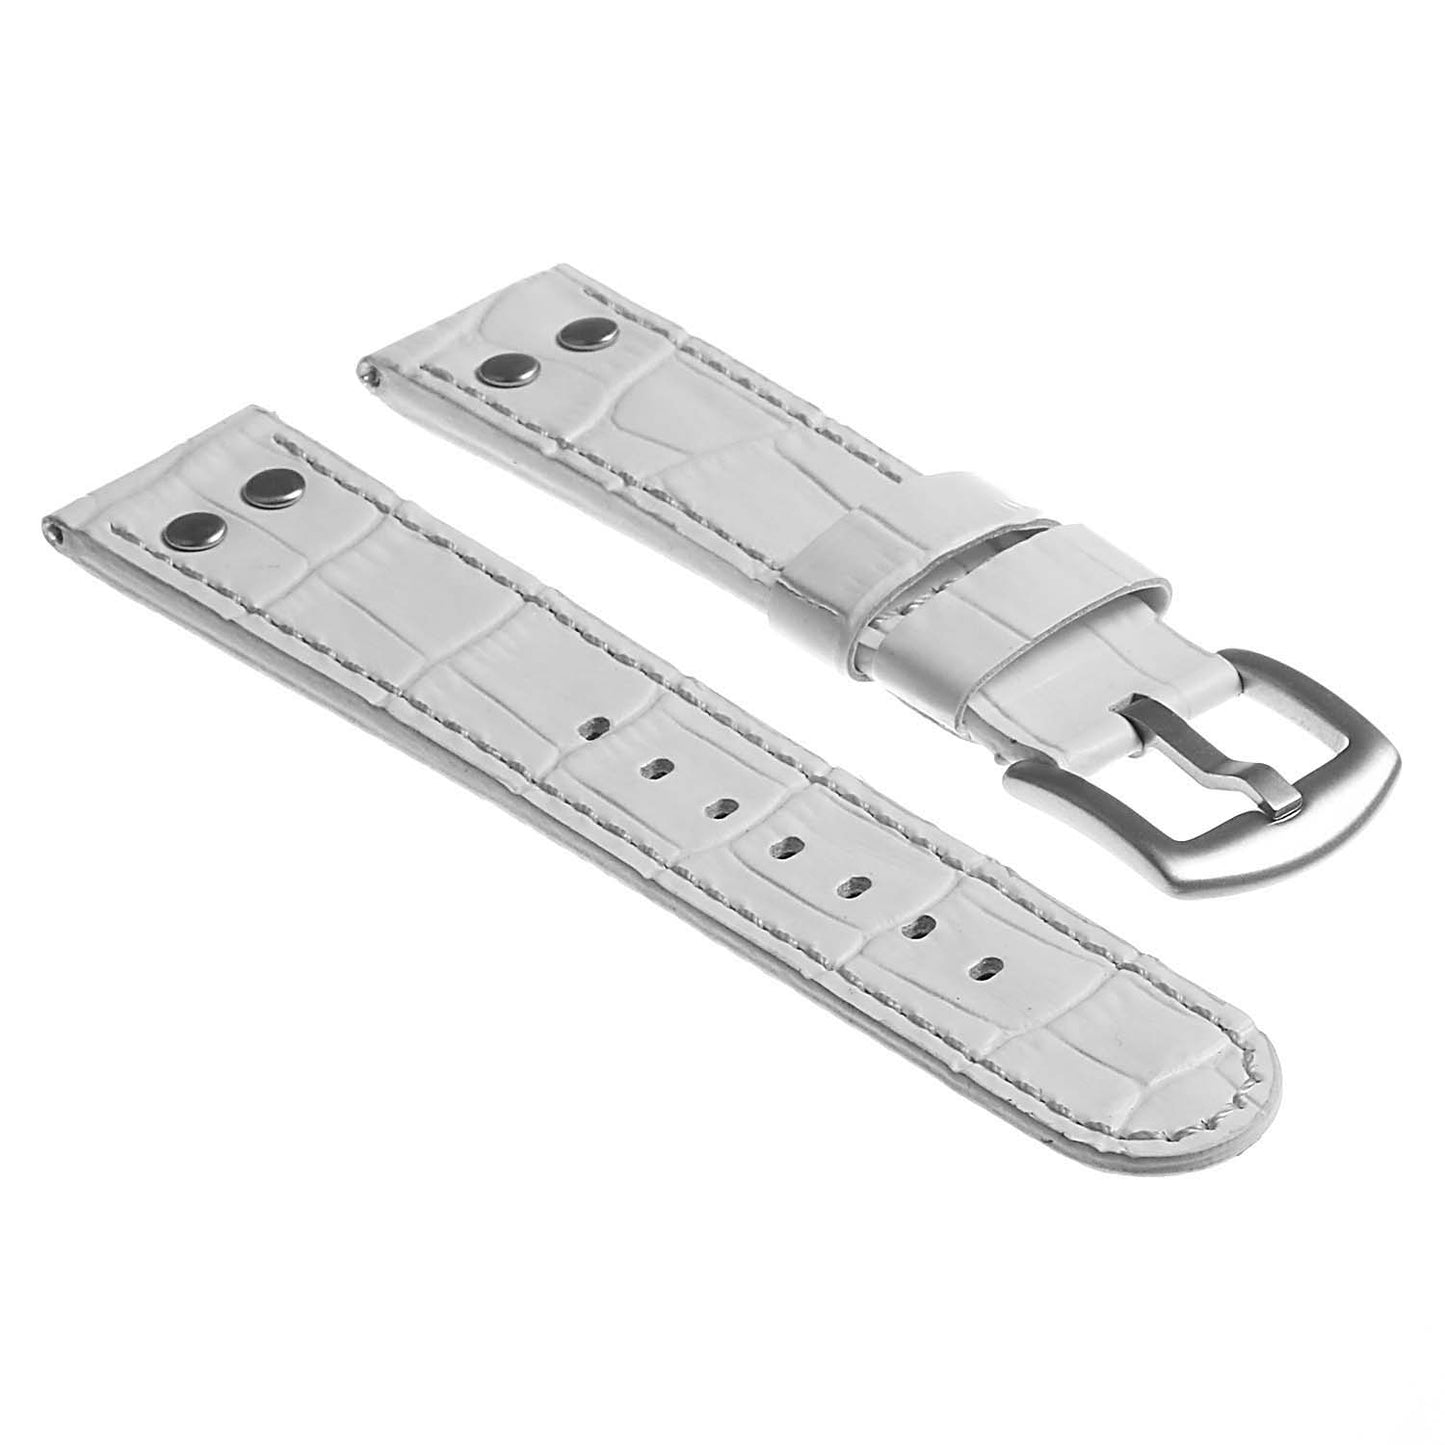 DASSARI Croc Embossed Leather Pilot Watch Band w/ Rivets for Apple Watch